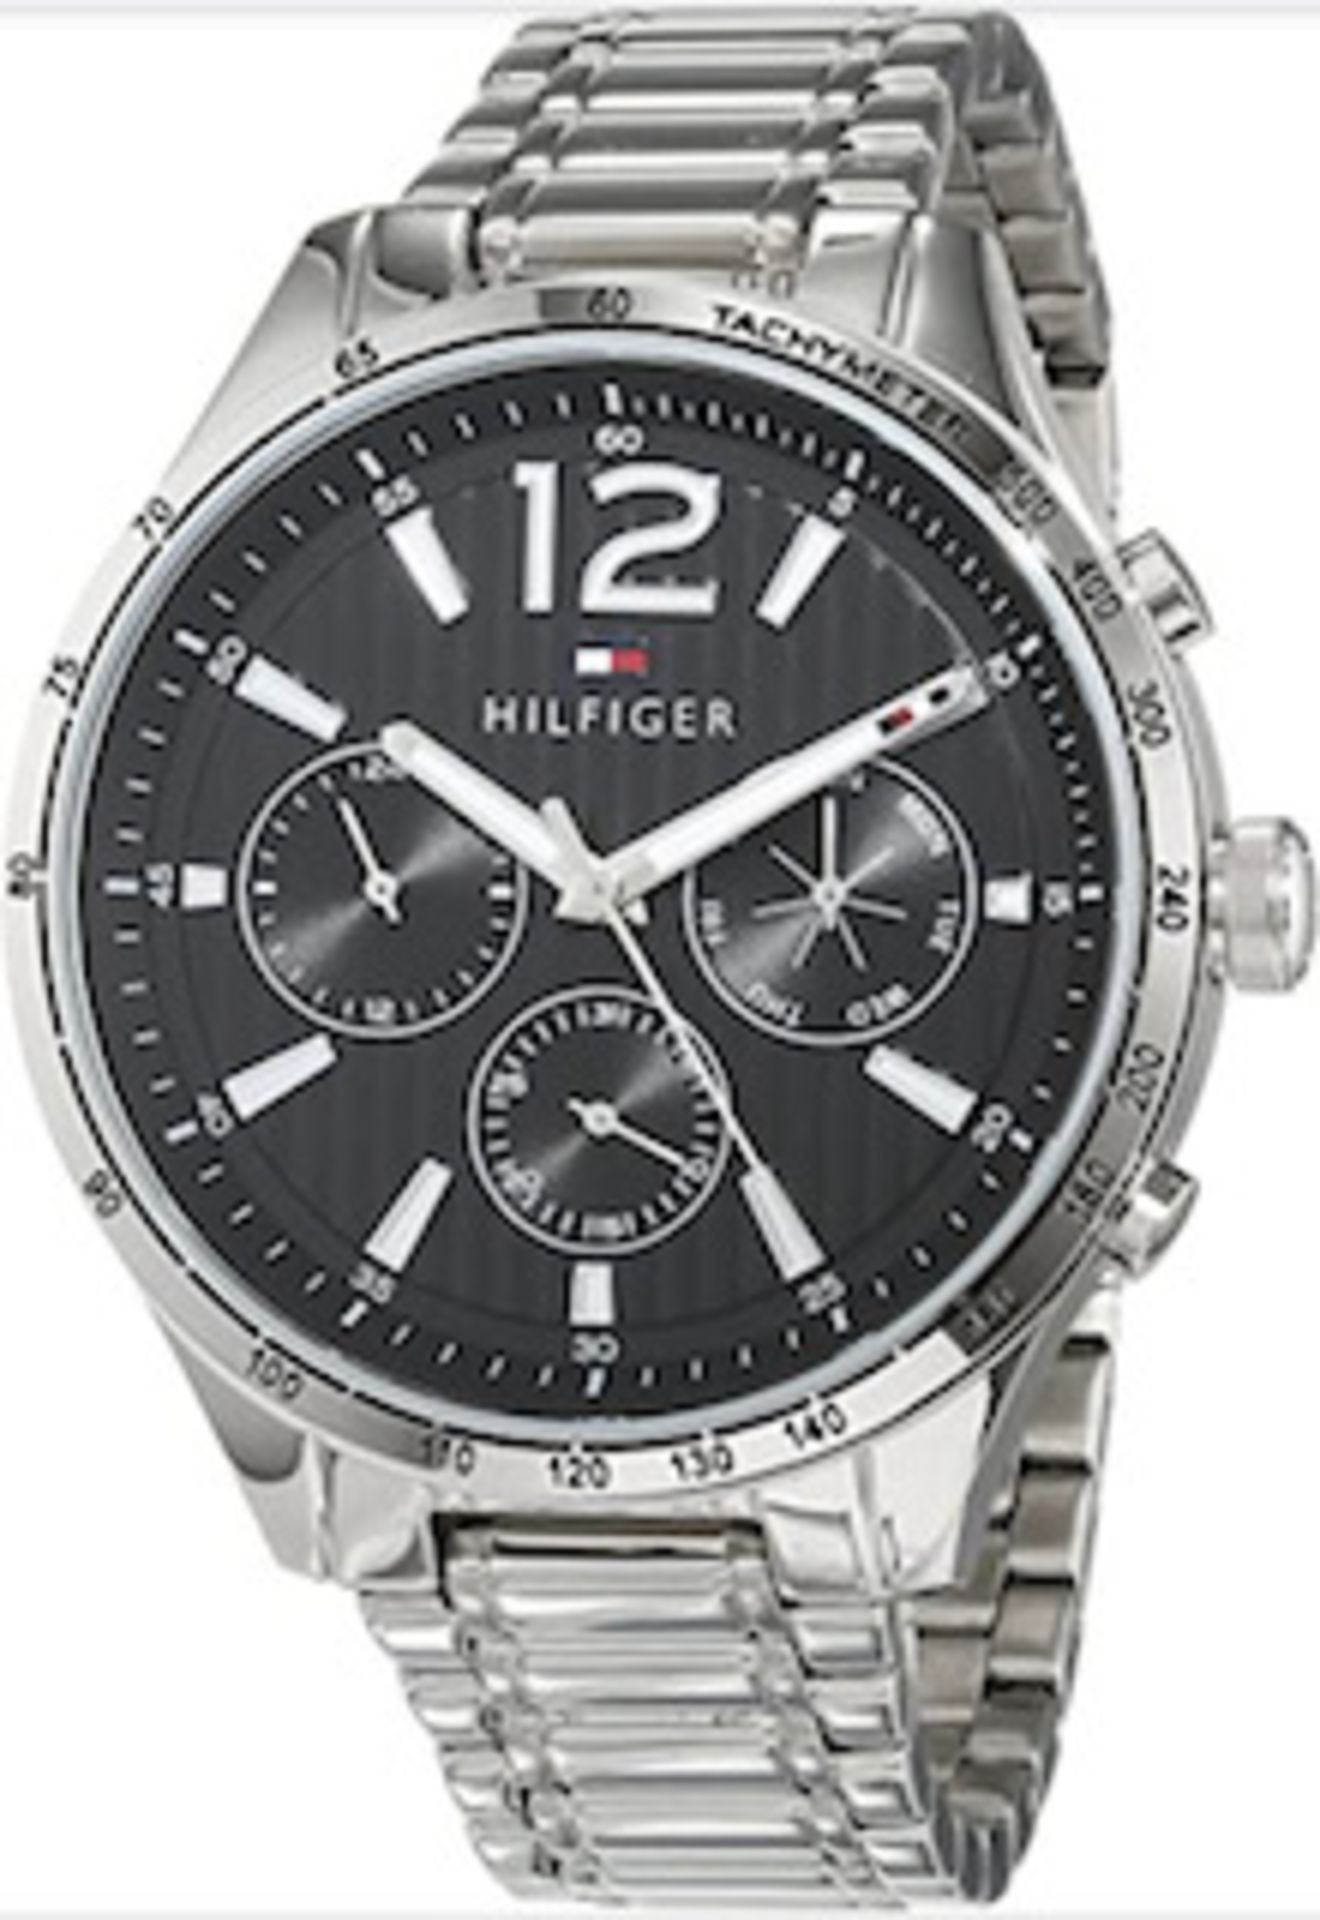 Tommy Hilfiger Men's Gavin Stainless Steel Silver Black Dial Watch - Image 4 of 6